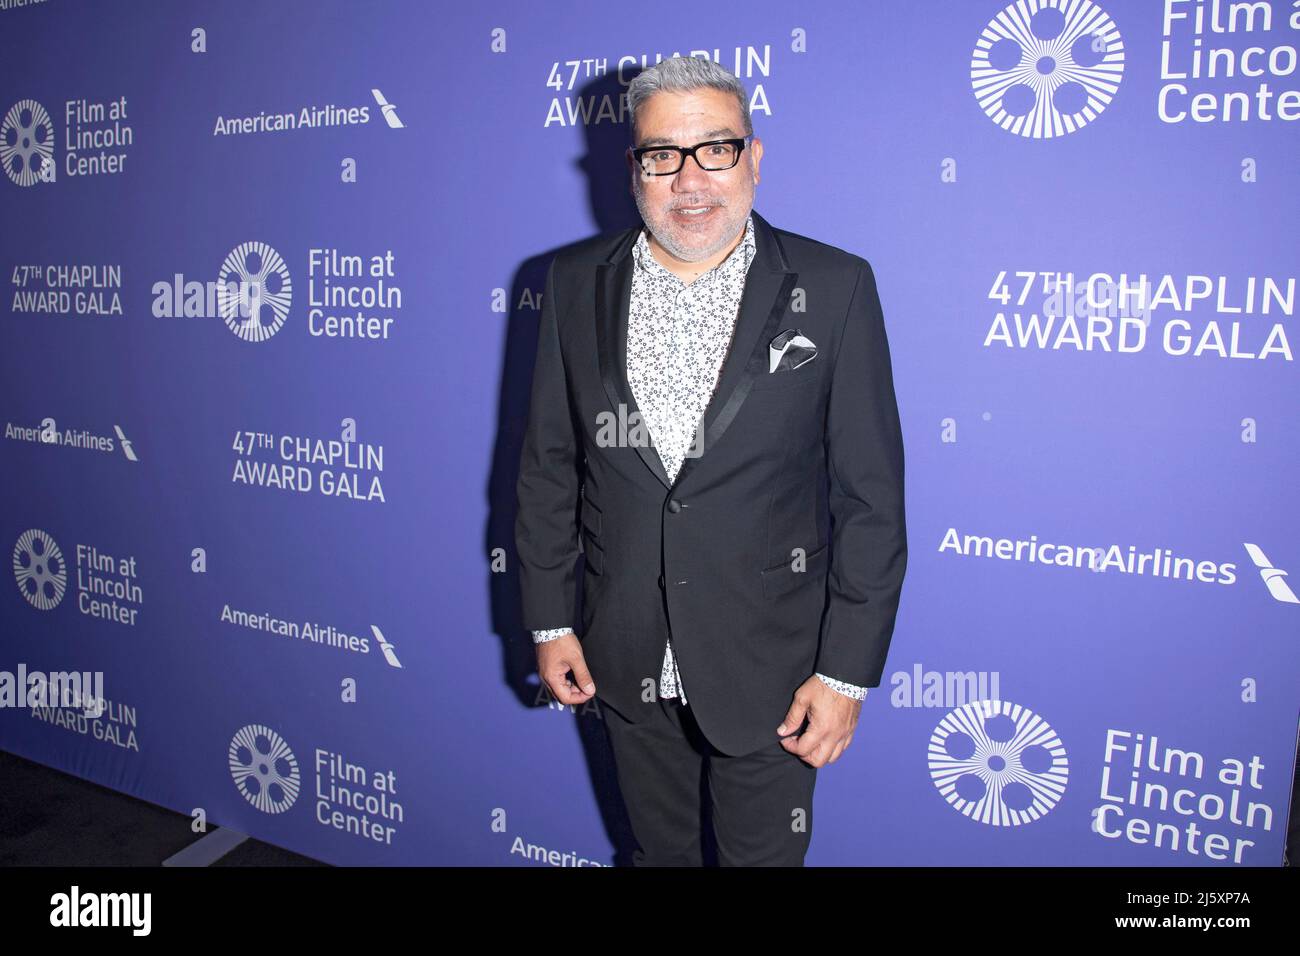 New York, United States. 25th Apr, 2022. Senior Vice President of FLC and Executive Director of the New York Film Festival Eugene Hernandez attends the 47th Chaplin Award Gala honoring Cate Blanchett at Alice Tully Hall, Lincoln Center in New York City. (Photo by Ron Adar/SOPA Images/Sipa USA) Credit: Sipa USA/Alamy Live News Stock Photo